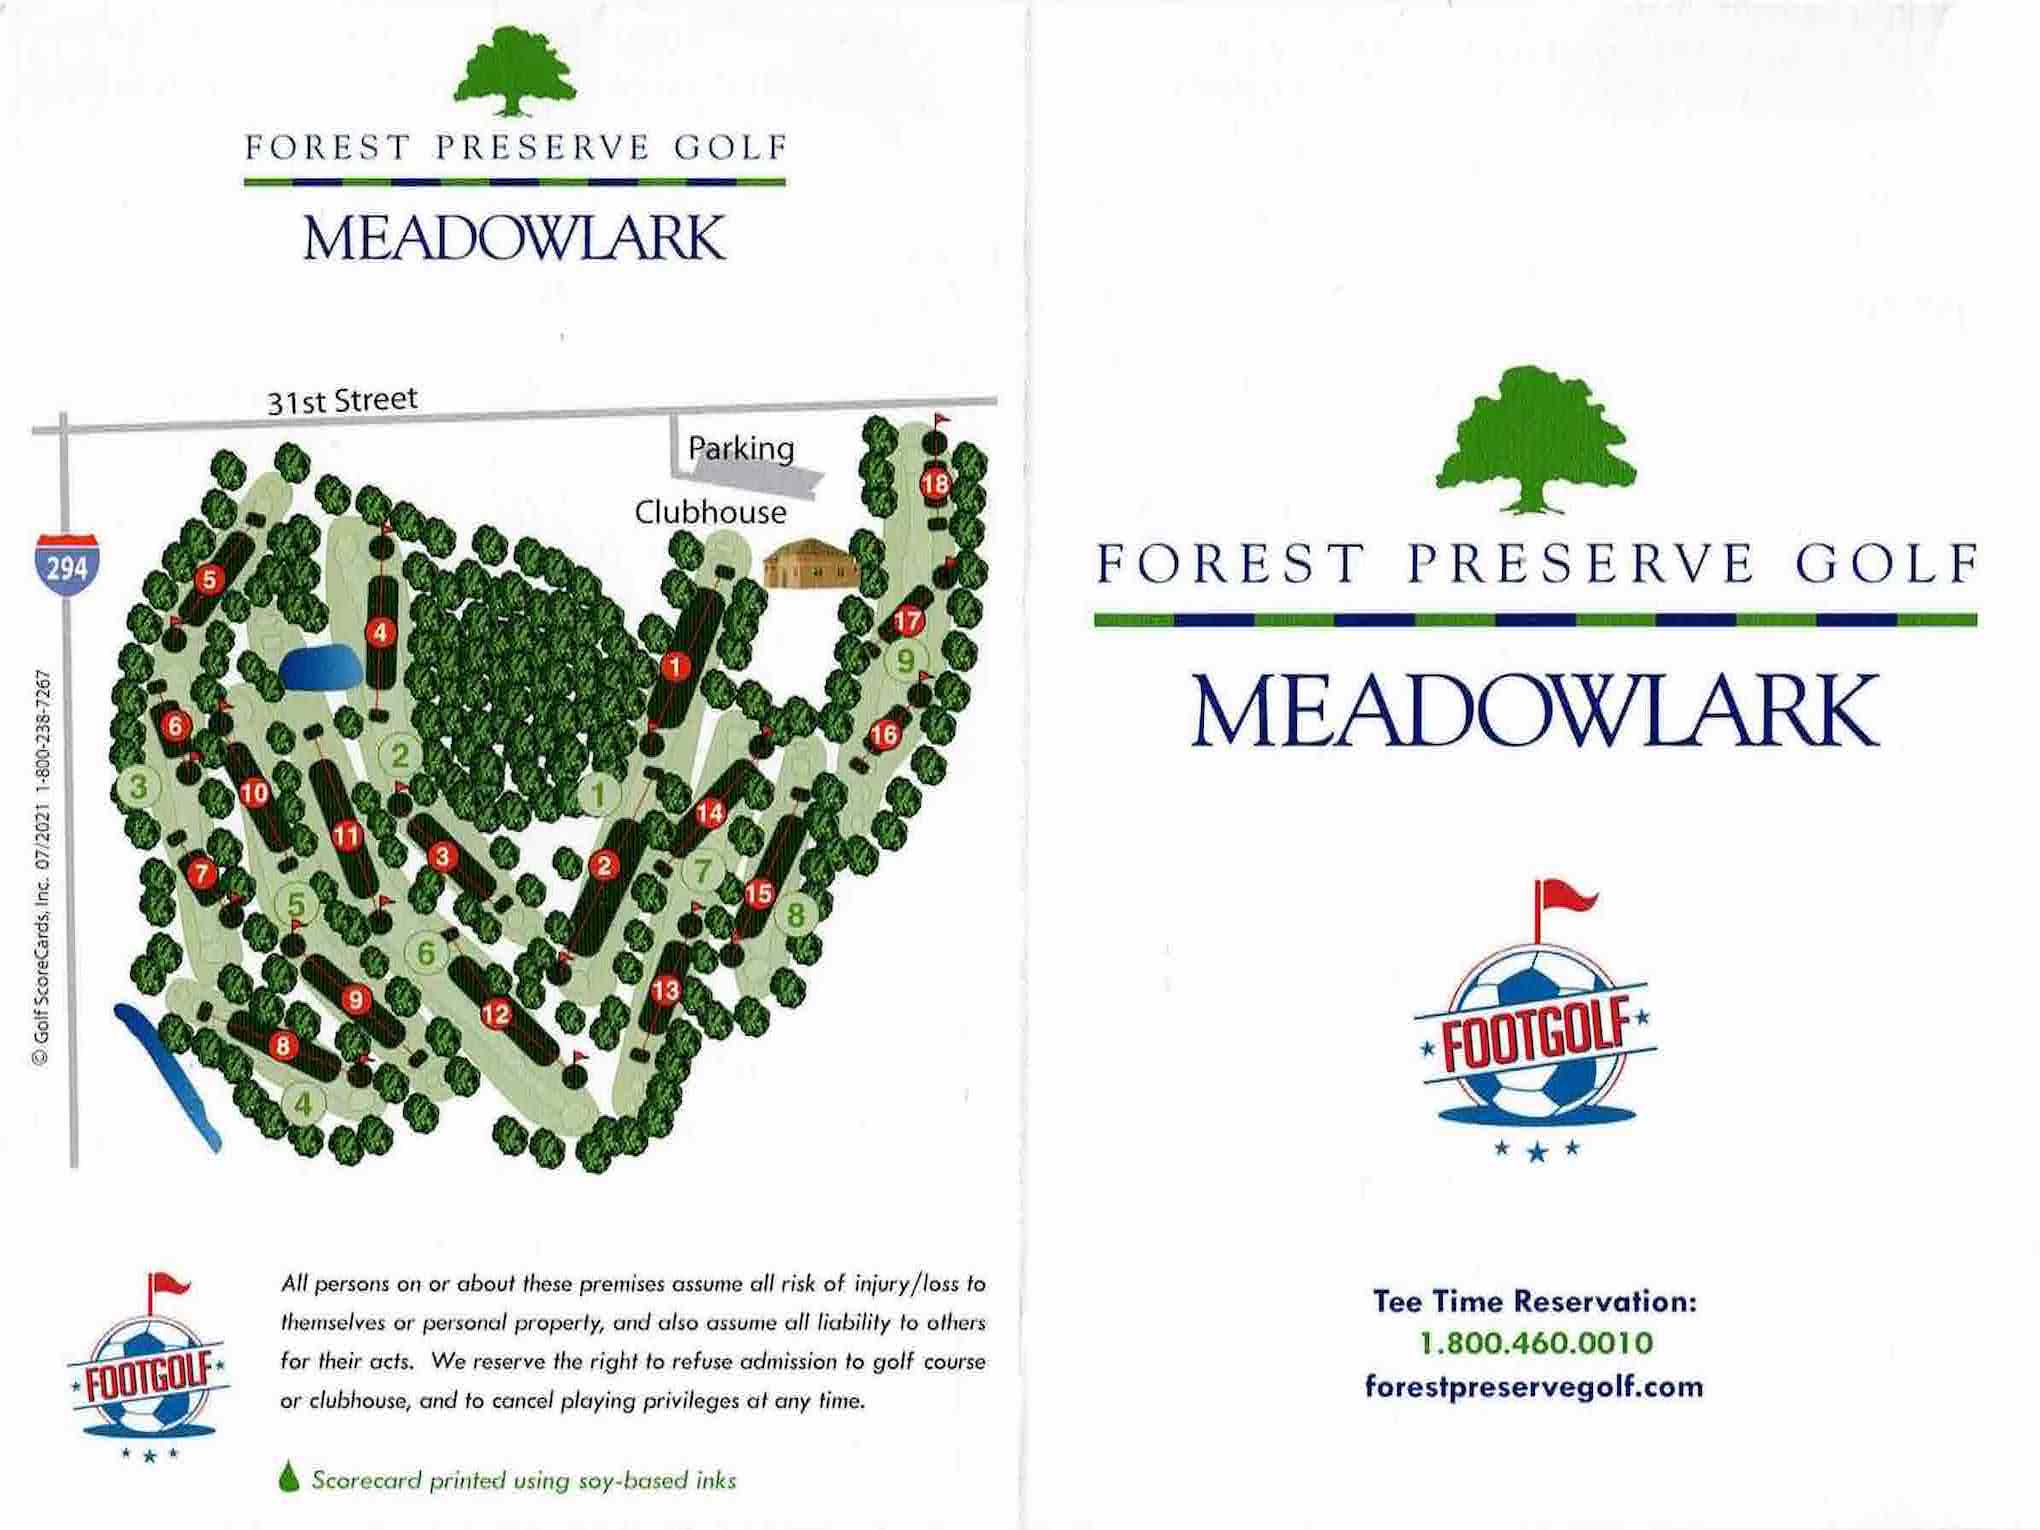 Scan of the scorecard from Meadowlark Golf Course in Hinsdale, Illinois. Meadowlark offers FootGolf, a version of golf played with a soccer ball. A lot like Disc Golf. This is the front of the FootGolf scorecard.